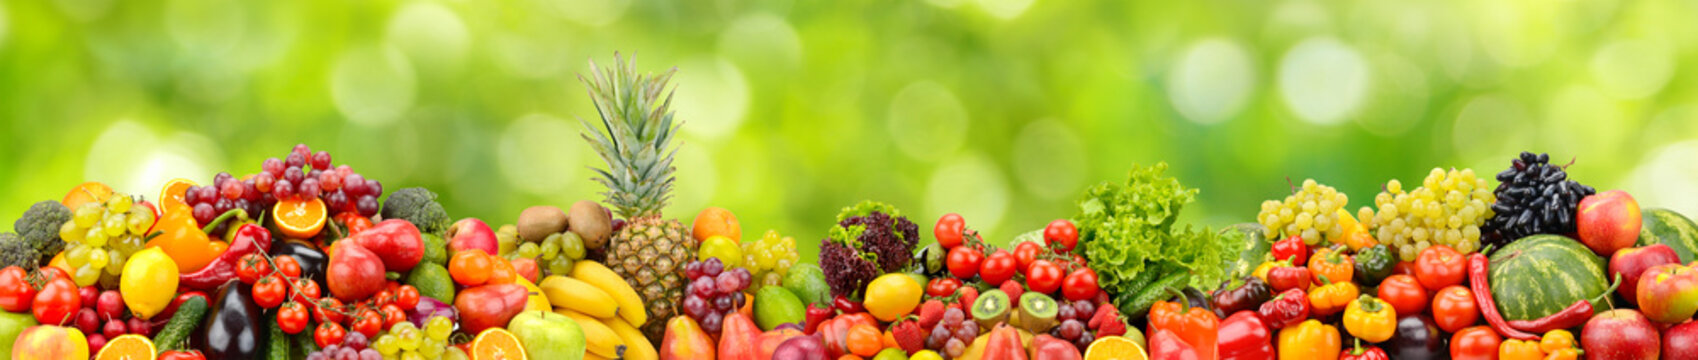 Various useful fruits and vegetables on green background.